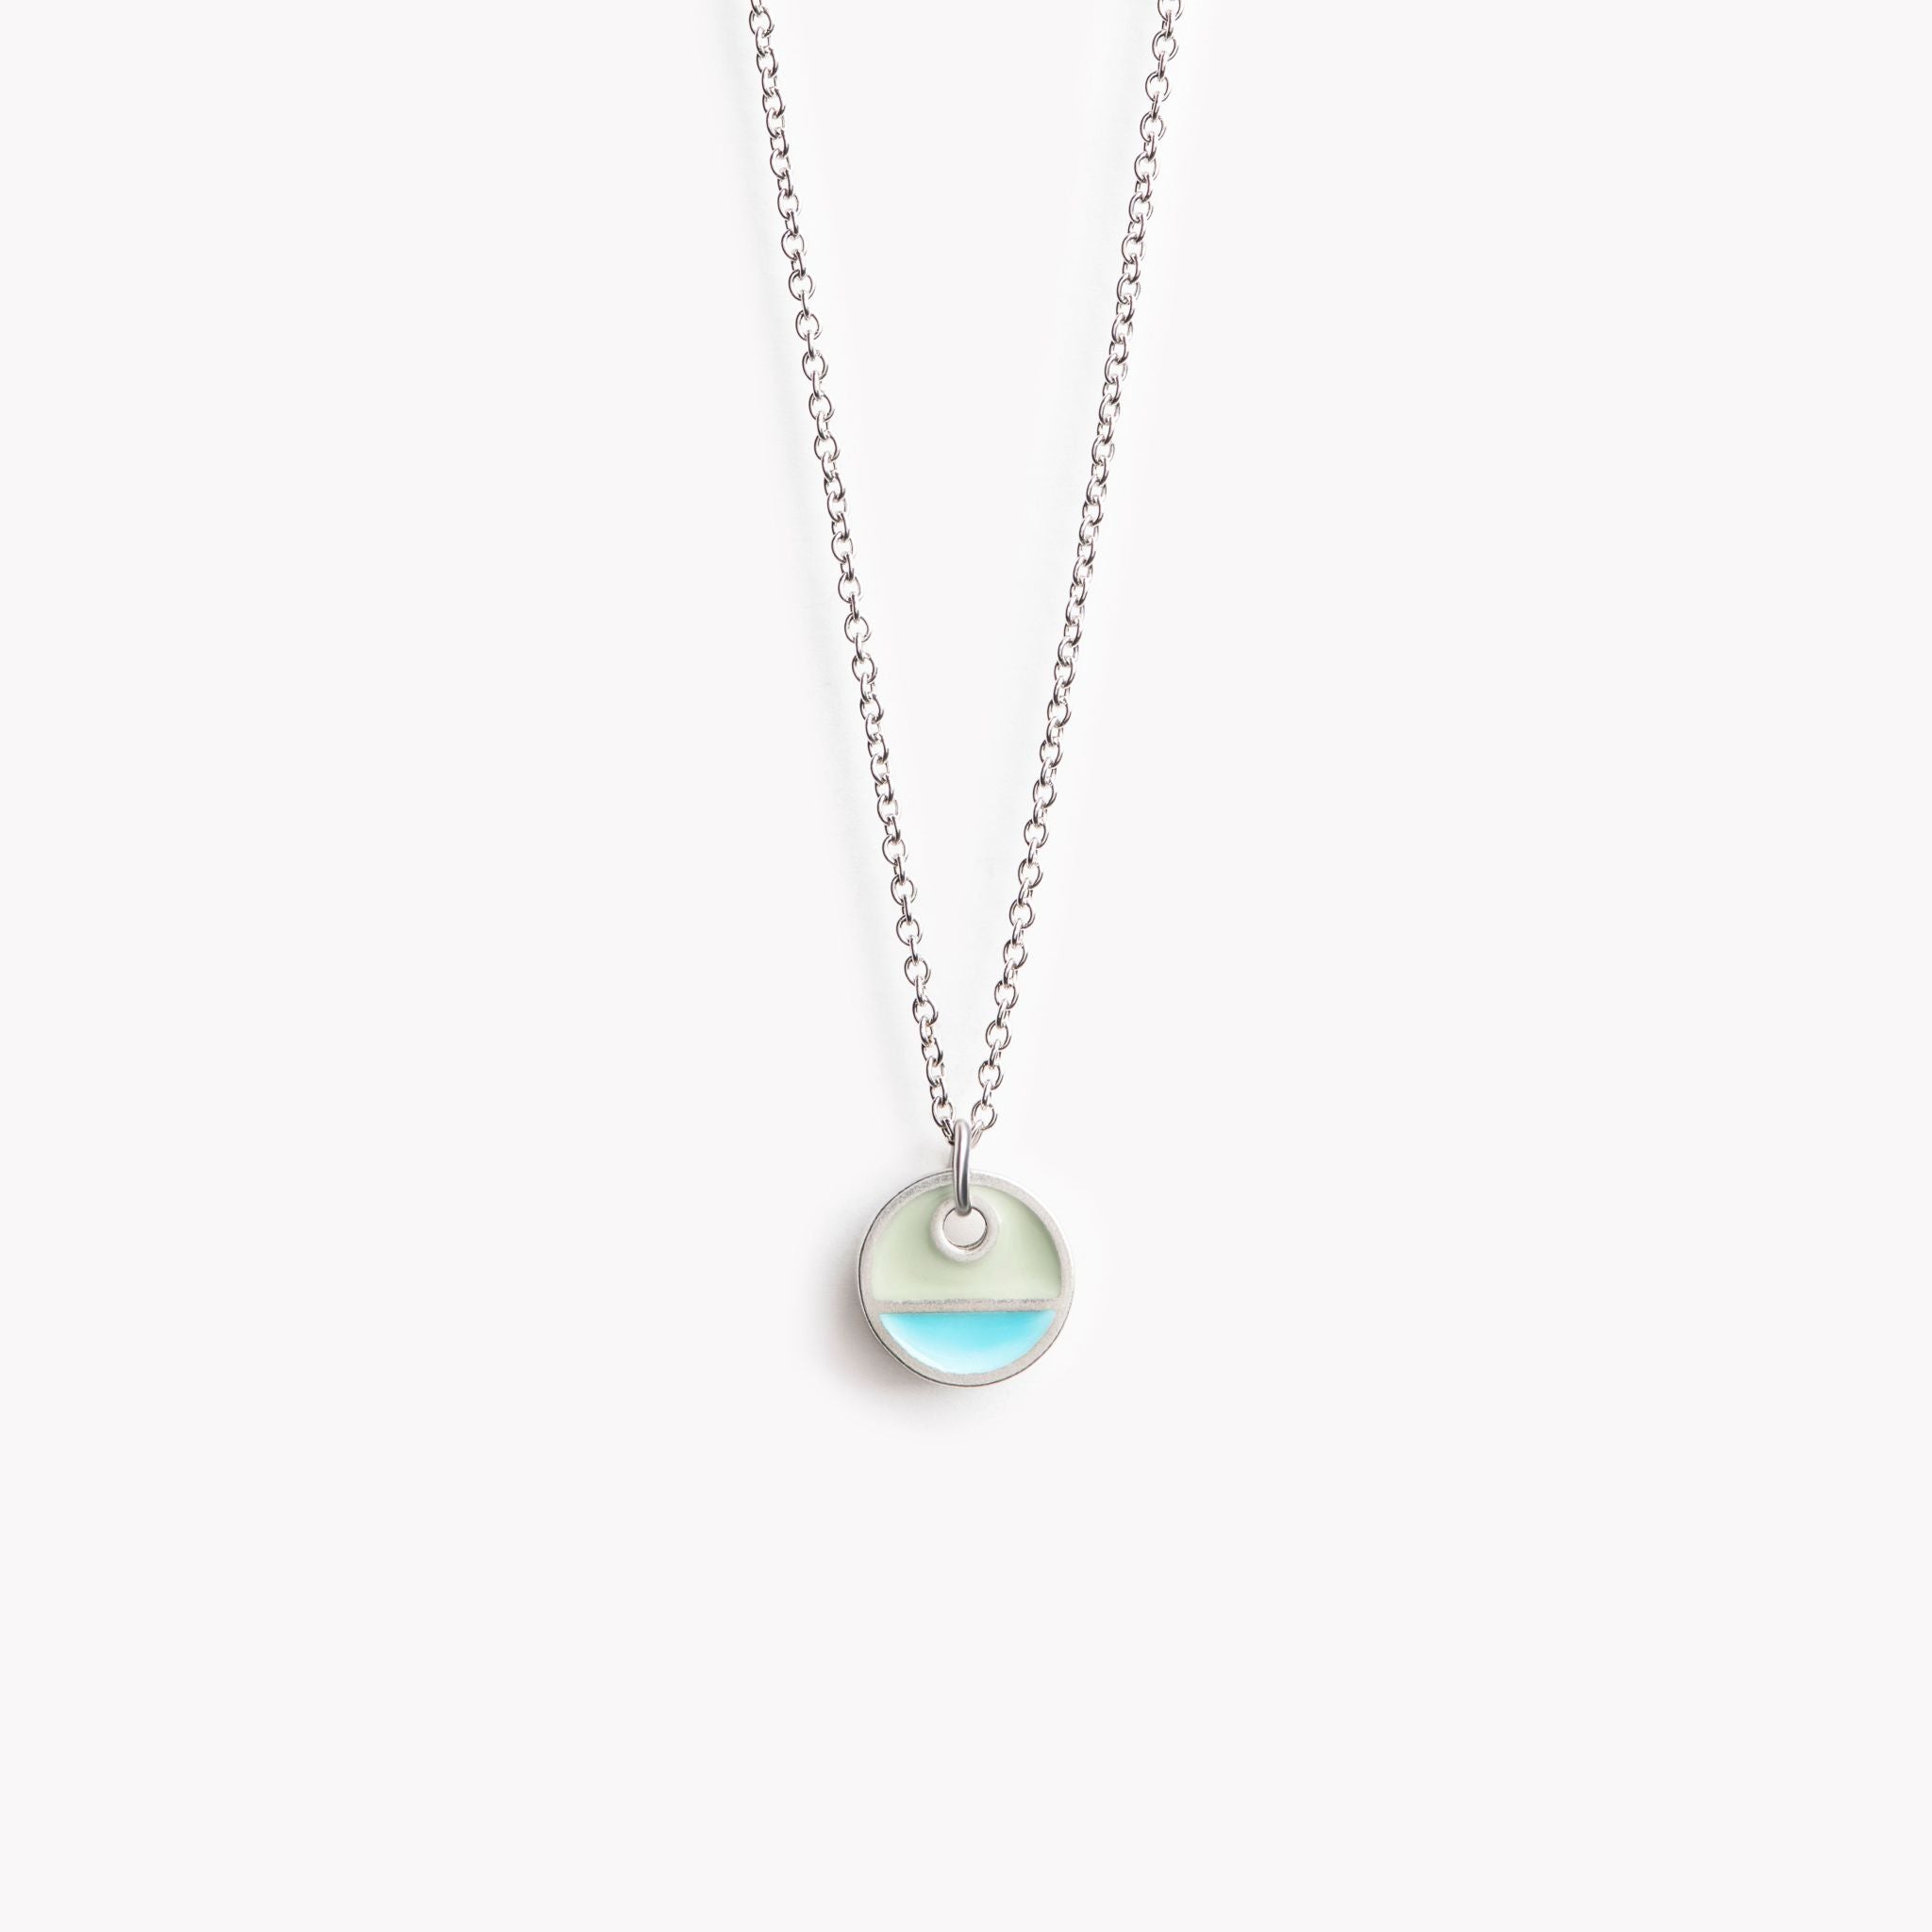 A simple circular pendant necklace with a horizontal division. In turquoise and grey.